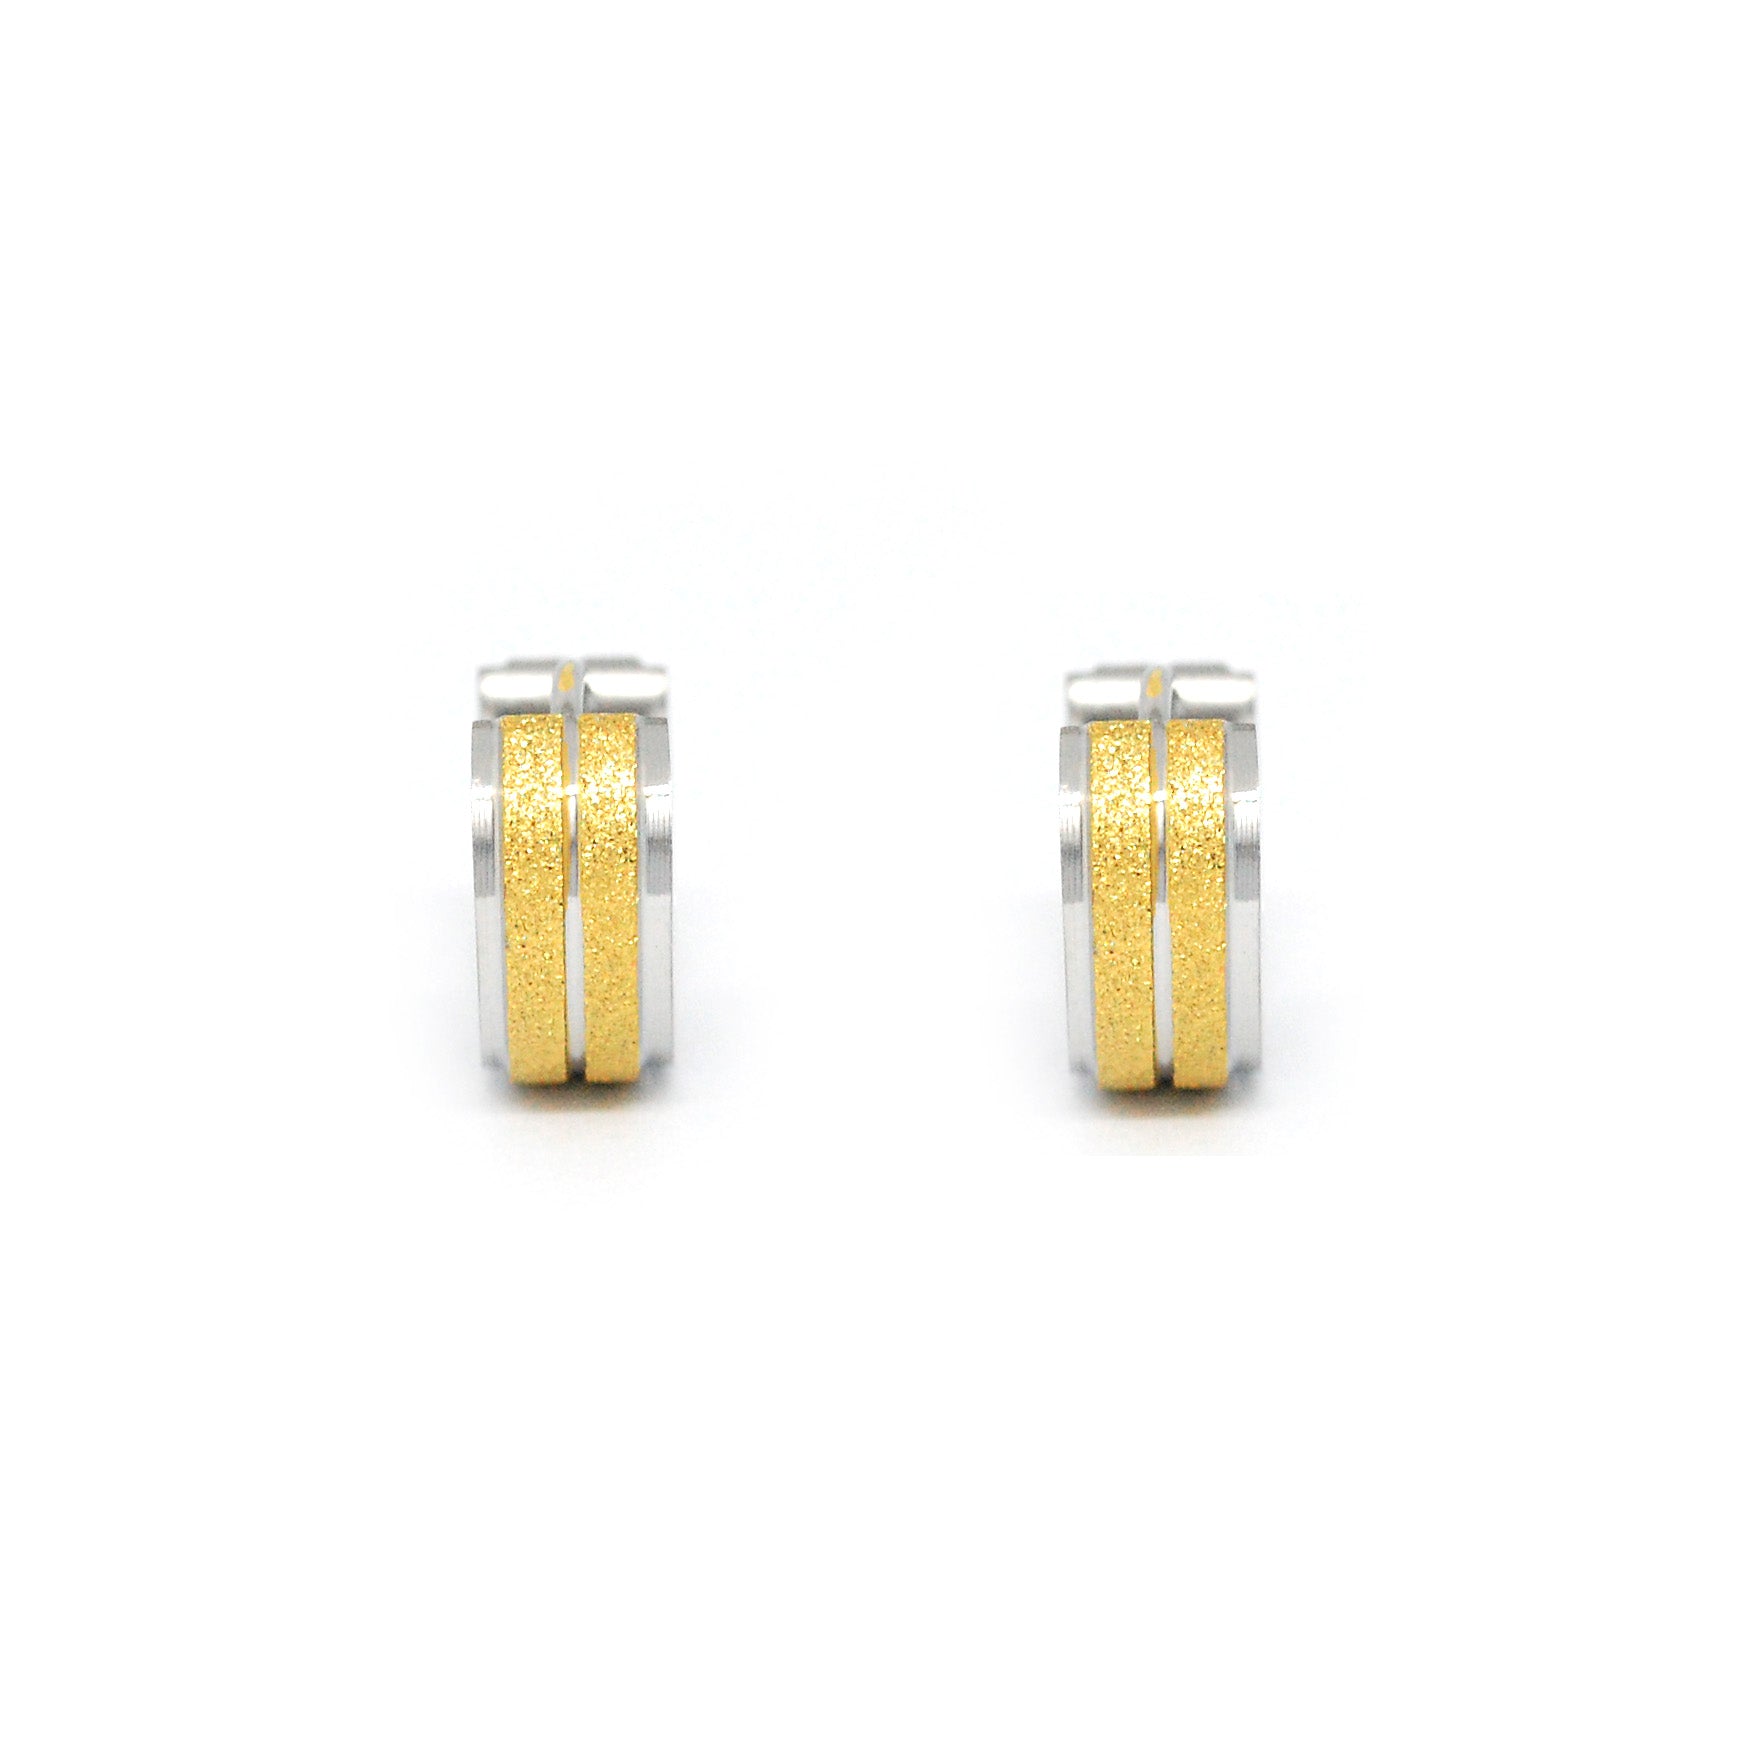 ESE 7867: 2-Lined IPG SB Creollas w/ SS Edges Earrings